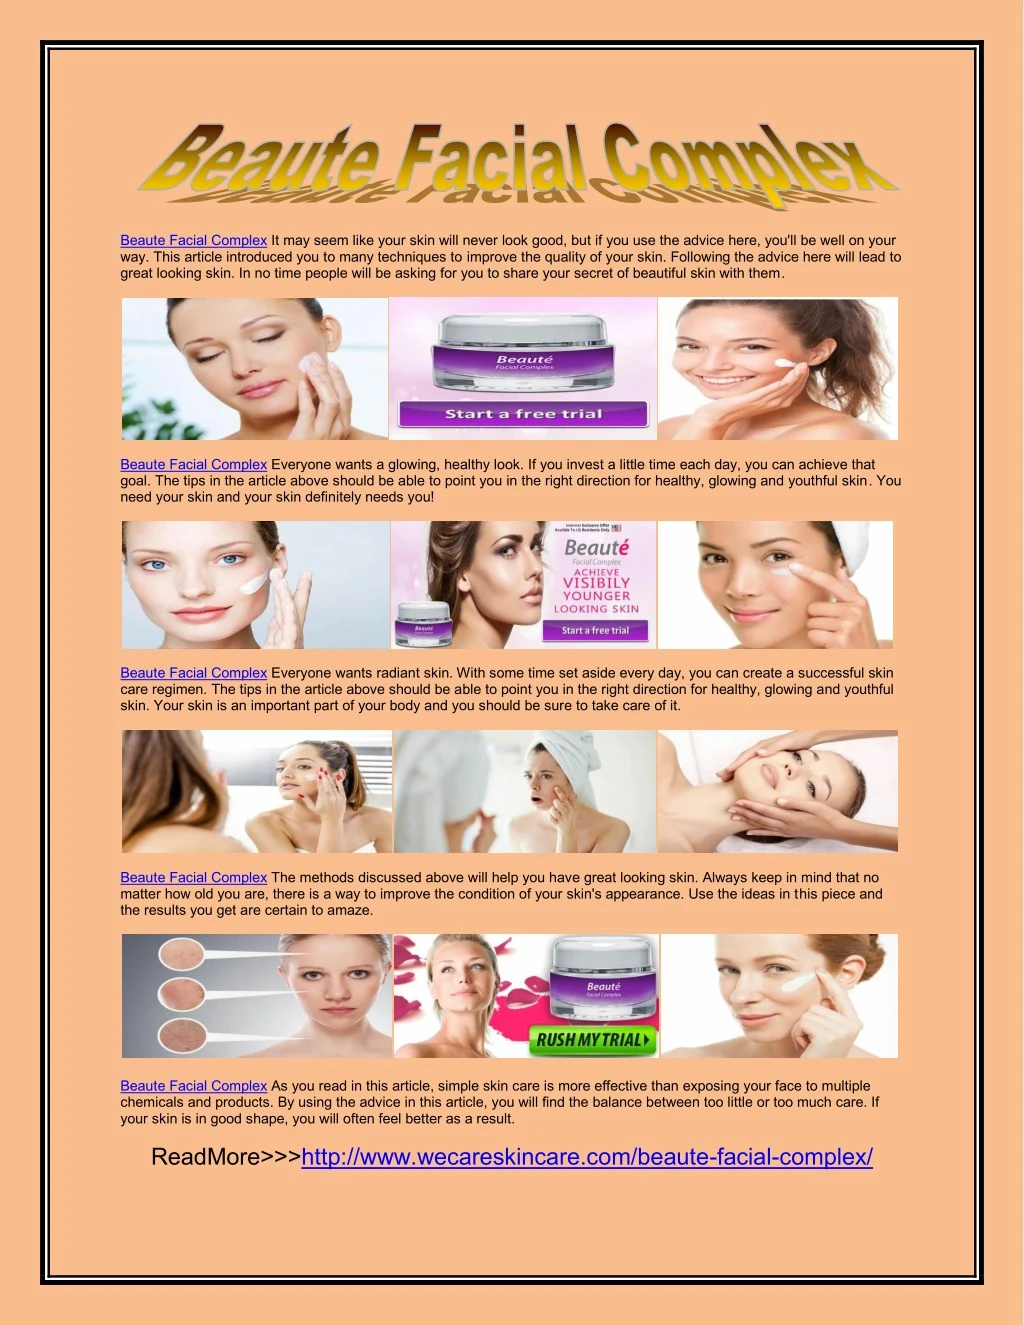 beaute facial complex it may seem like your skin